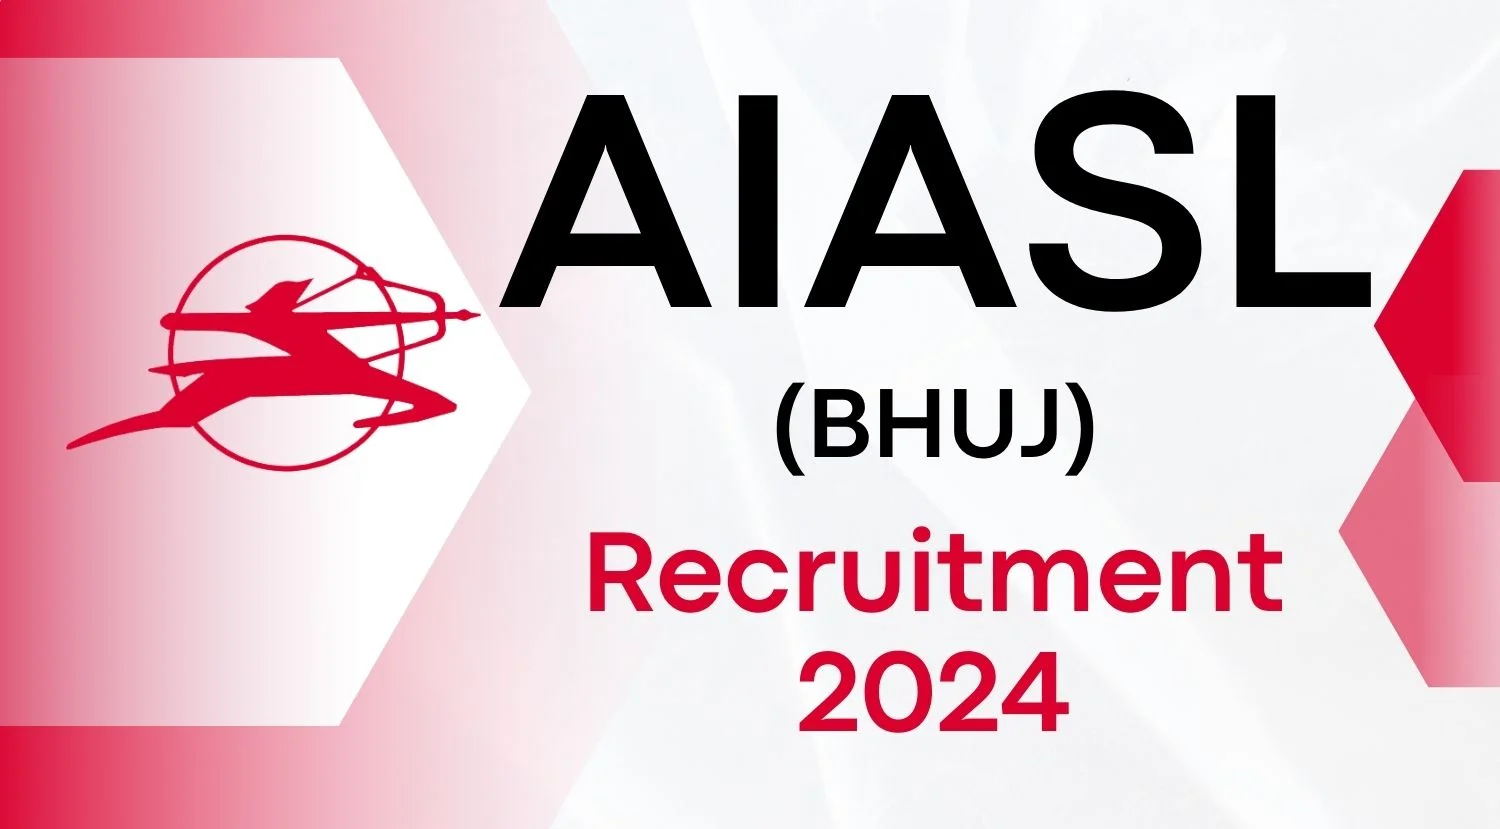 AIASL (BHUJ) Recruitment 2024 Notification Out for Various Vacancies